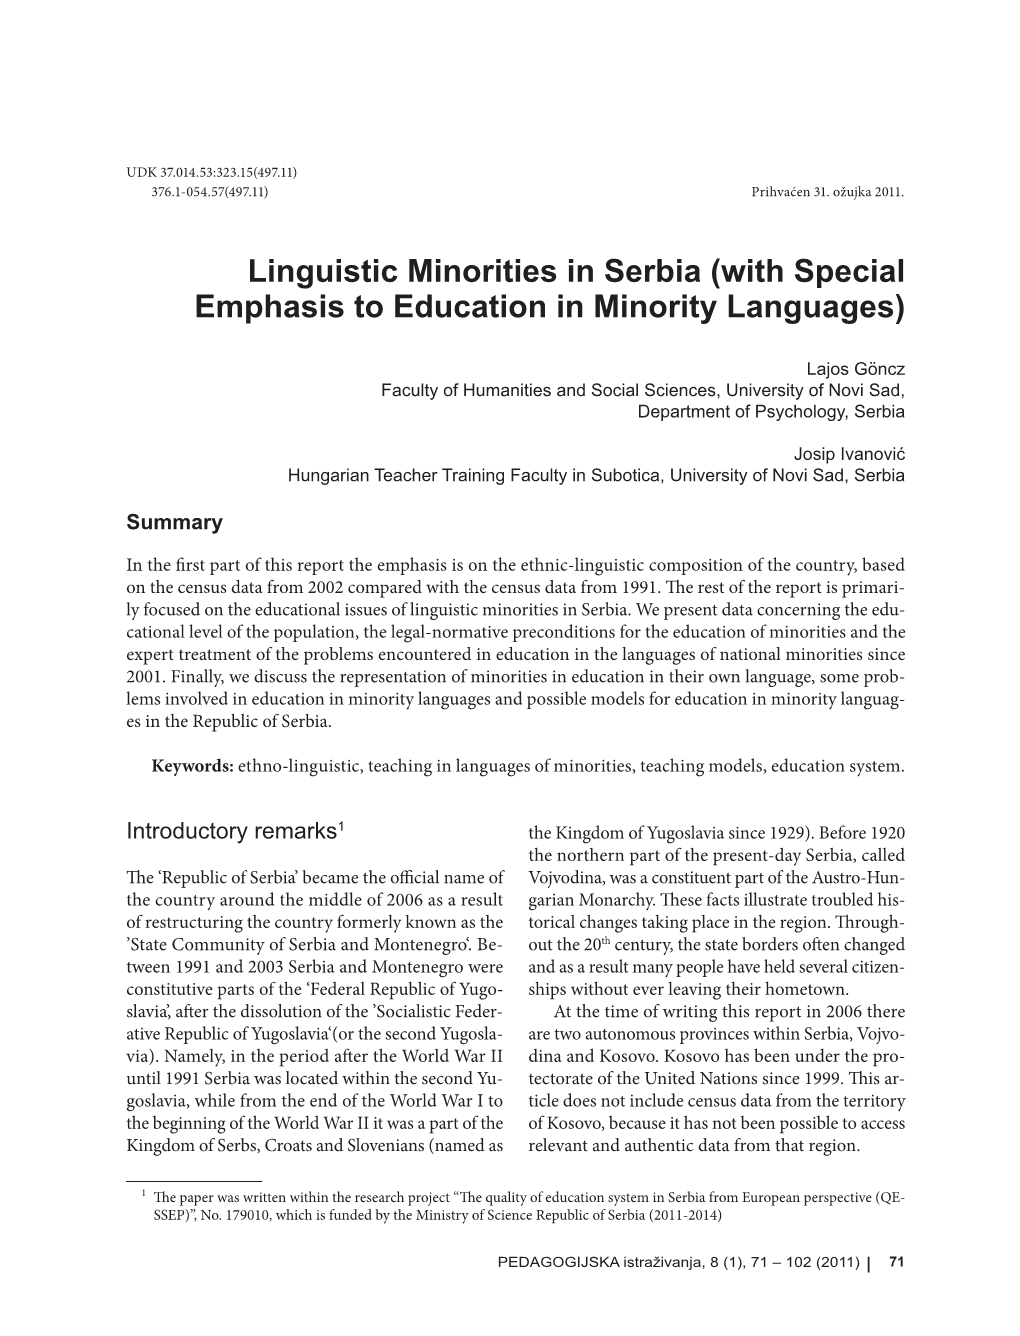 Linguistic Minorities in Serbia (With Special Emphasis to Education in Minority Languages)